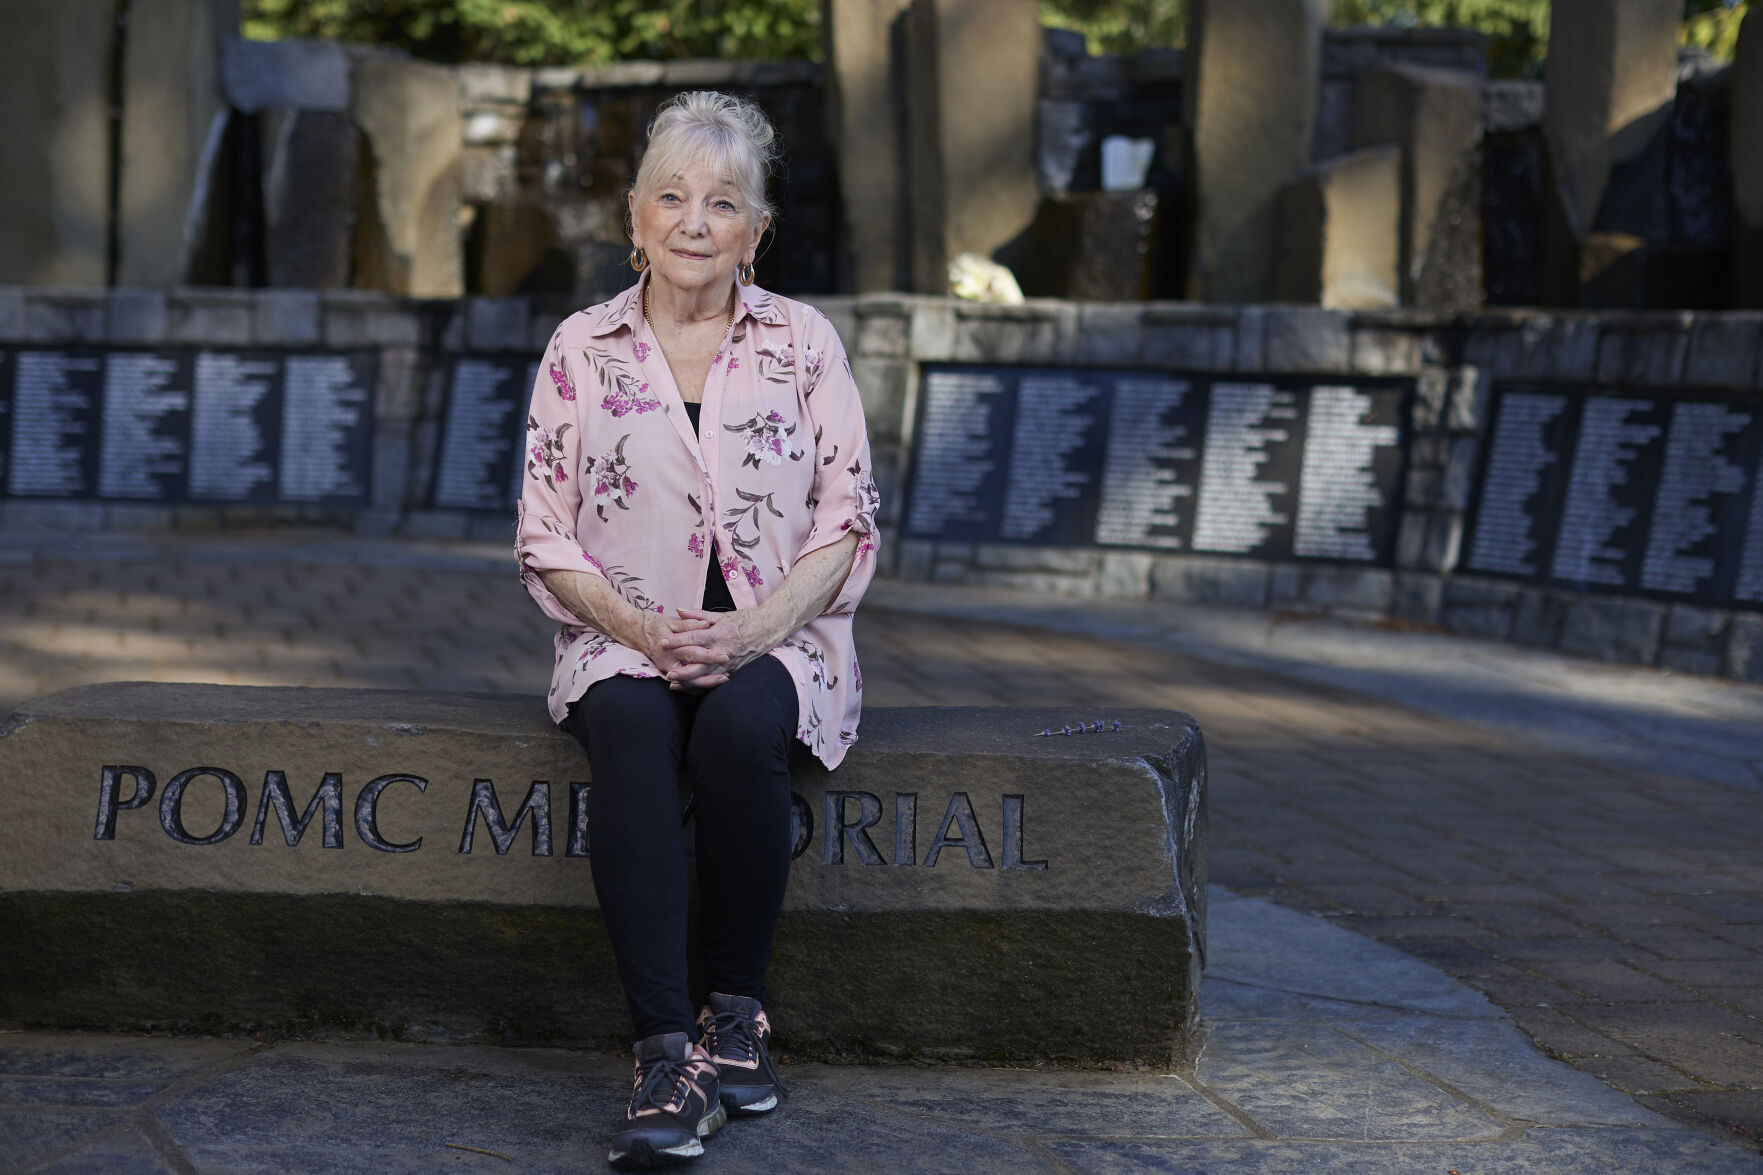 <p>Mary Elledge, whose son was murdered in 1986 and is the head of the greater Portland chapter of Parents of Murdered Children, sits at a memorial in Oregon City, Ore., on July 20, 2022. Elledge is a registered Democrat but this November she will vote for the independent candidate for Oregon governor because she feels Democrats are too progressive on issues like bail and sentencing reform and early release. (AP Photo/Craig Mitchelldyer)</p>   PHOTO CREDIT: Craig Mitchelldyer - freelancer, FR170751 AP